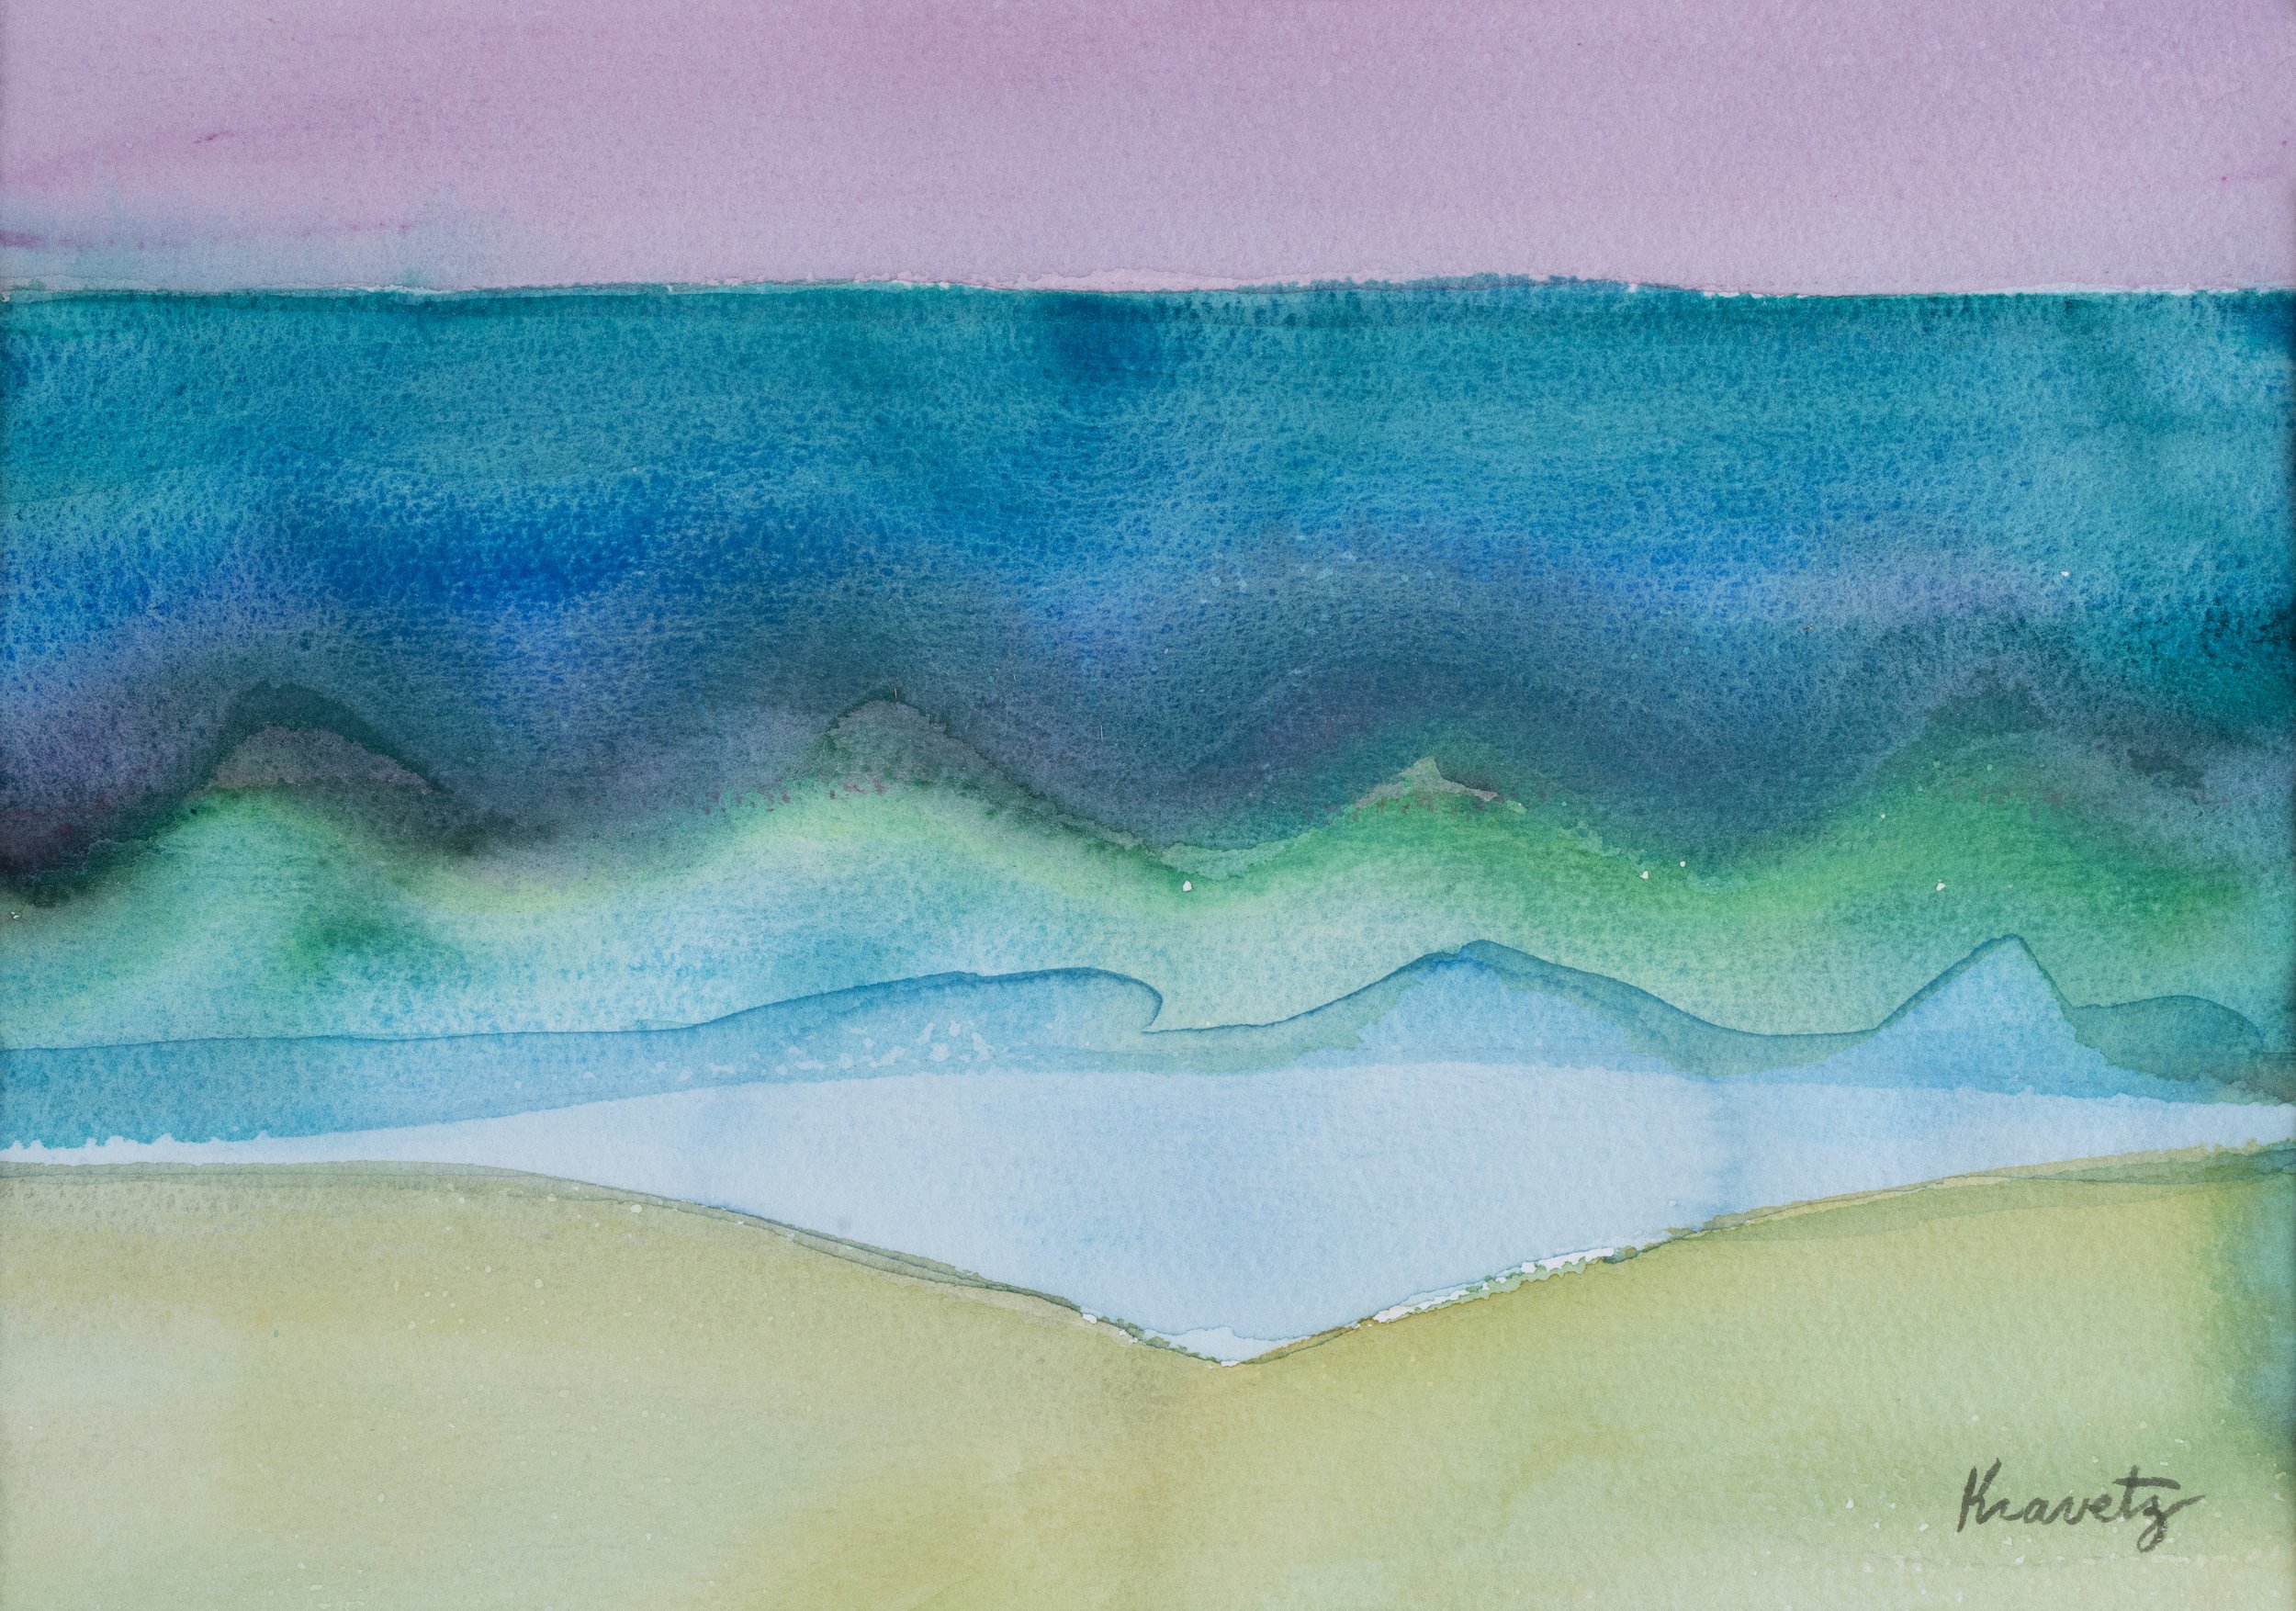 Calm Day at the Beach II, 1989, watercolor, 16x20 inches with mat